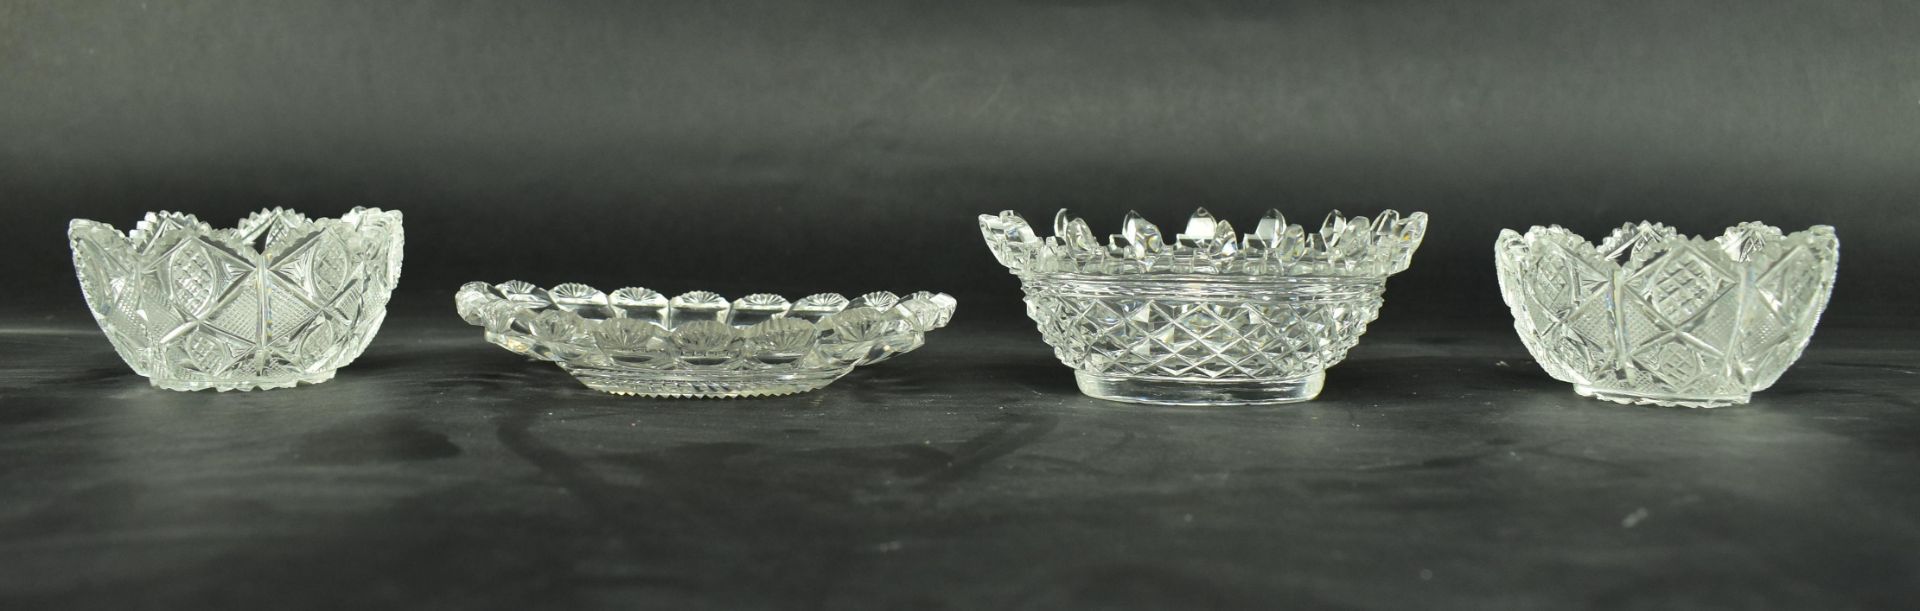 COLLECTION OF EARLY 19TH CENTURY CUT GLASS TABLEWARE